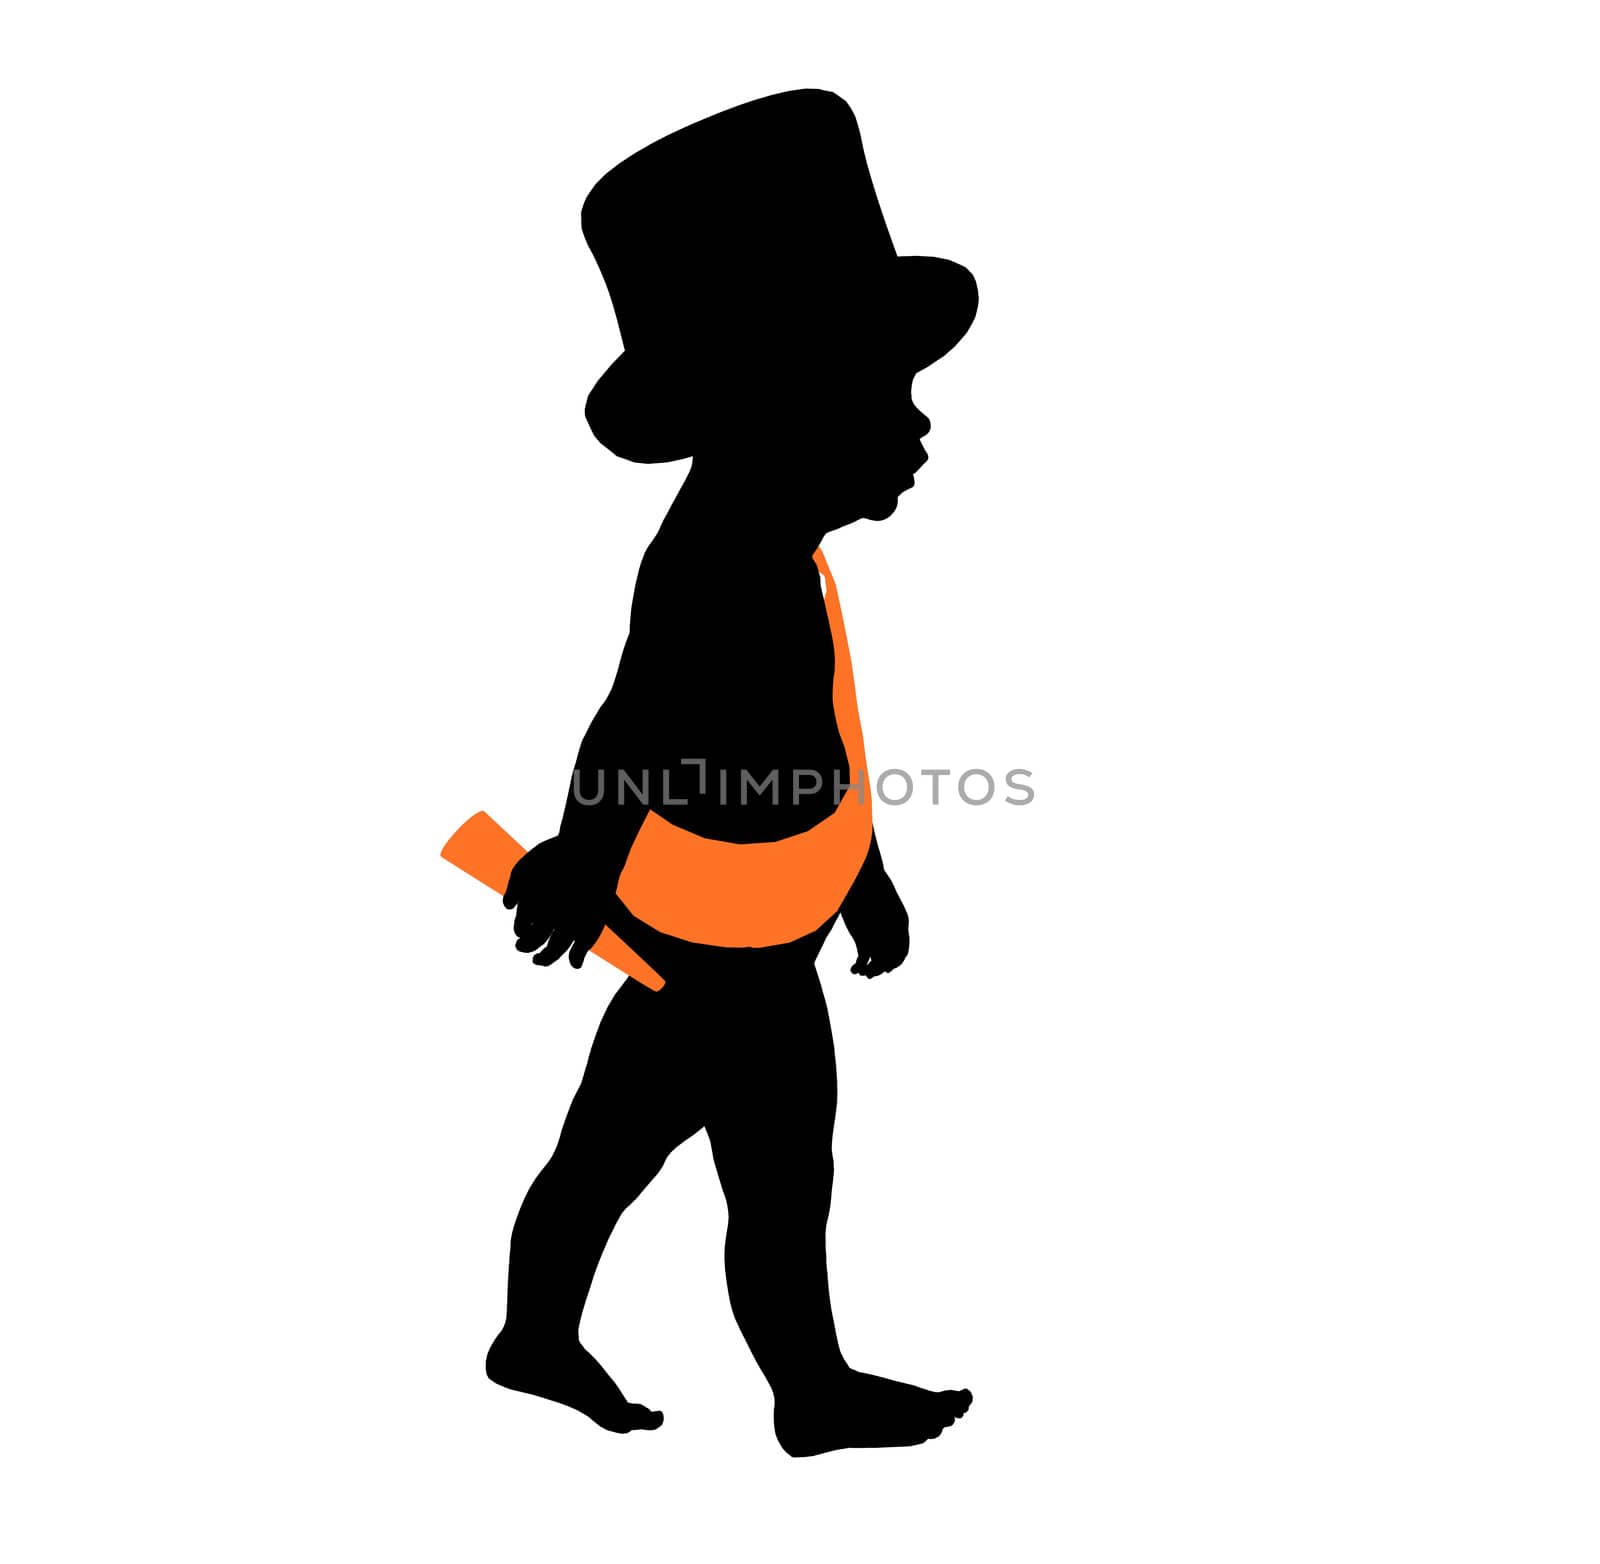 New years baby silhouette on a white background